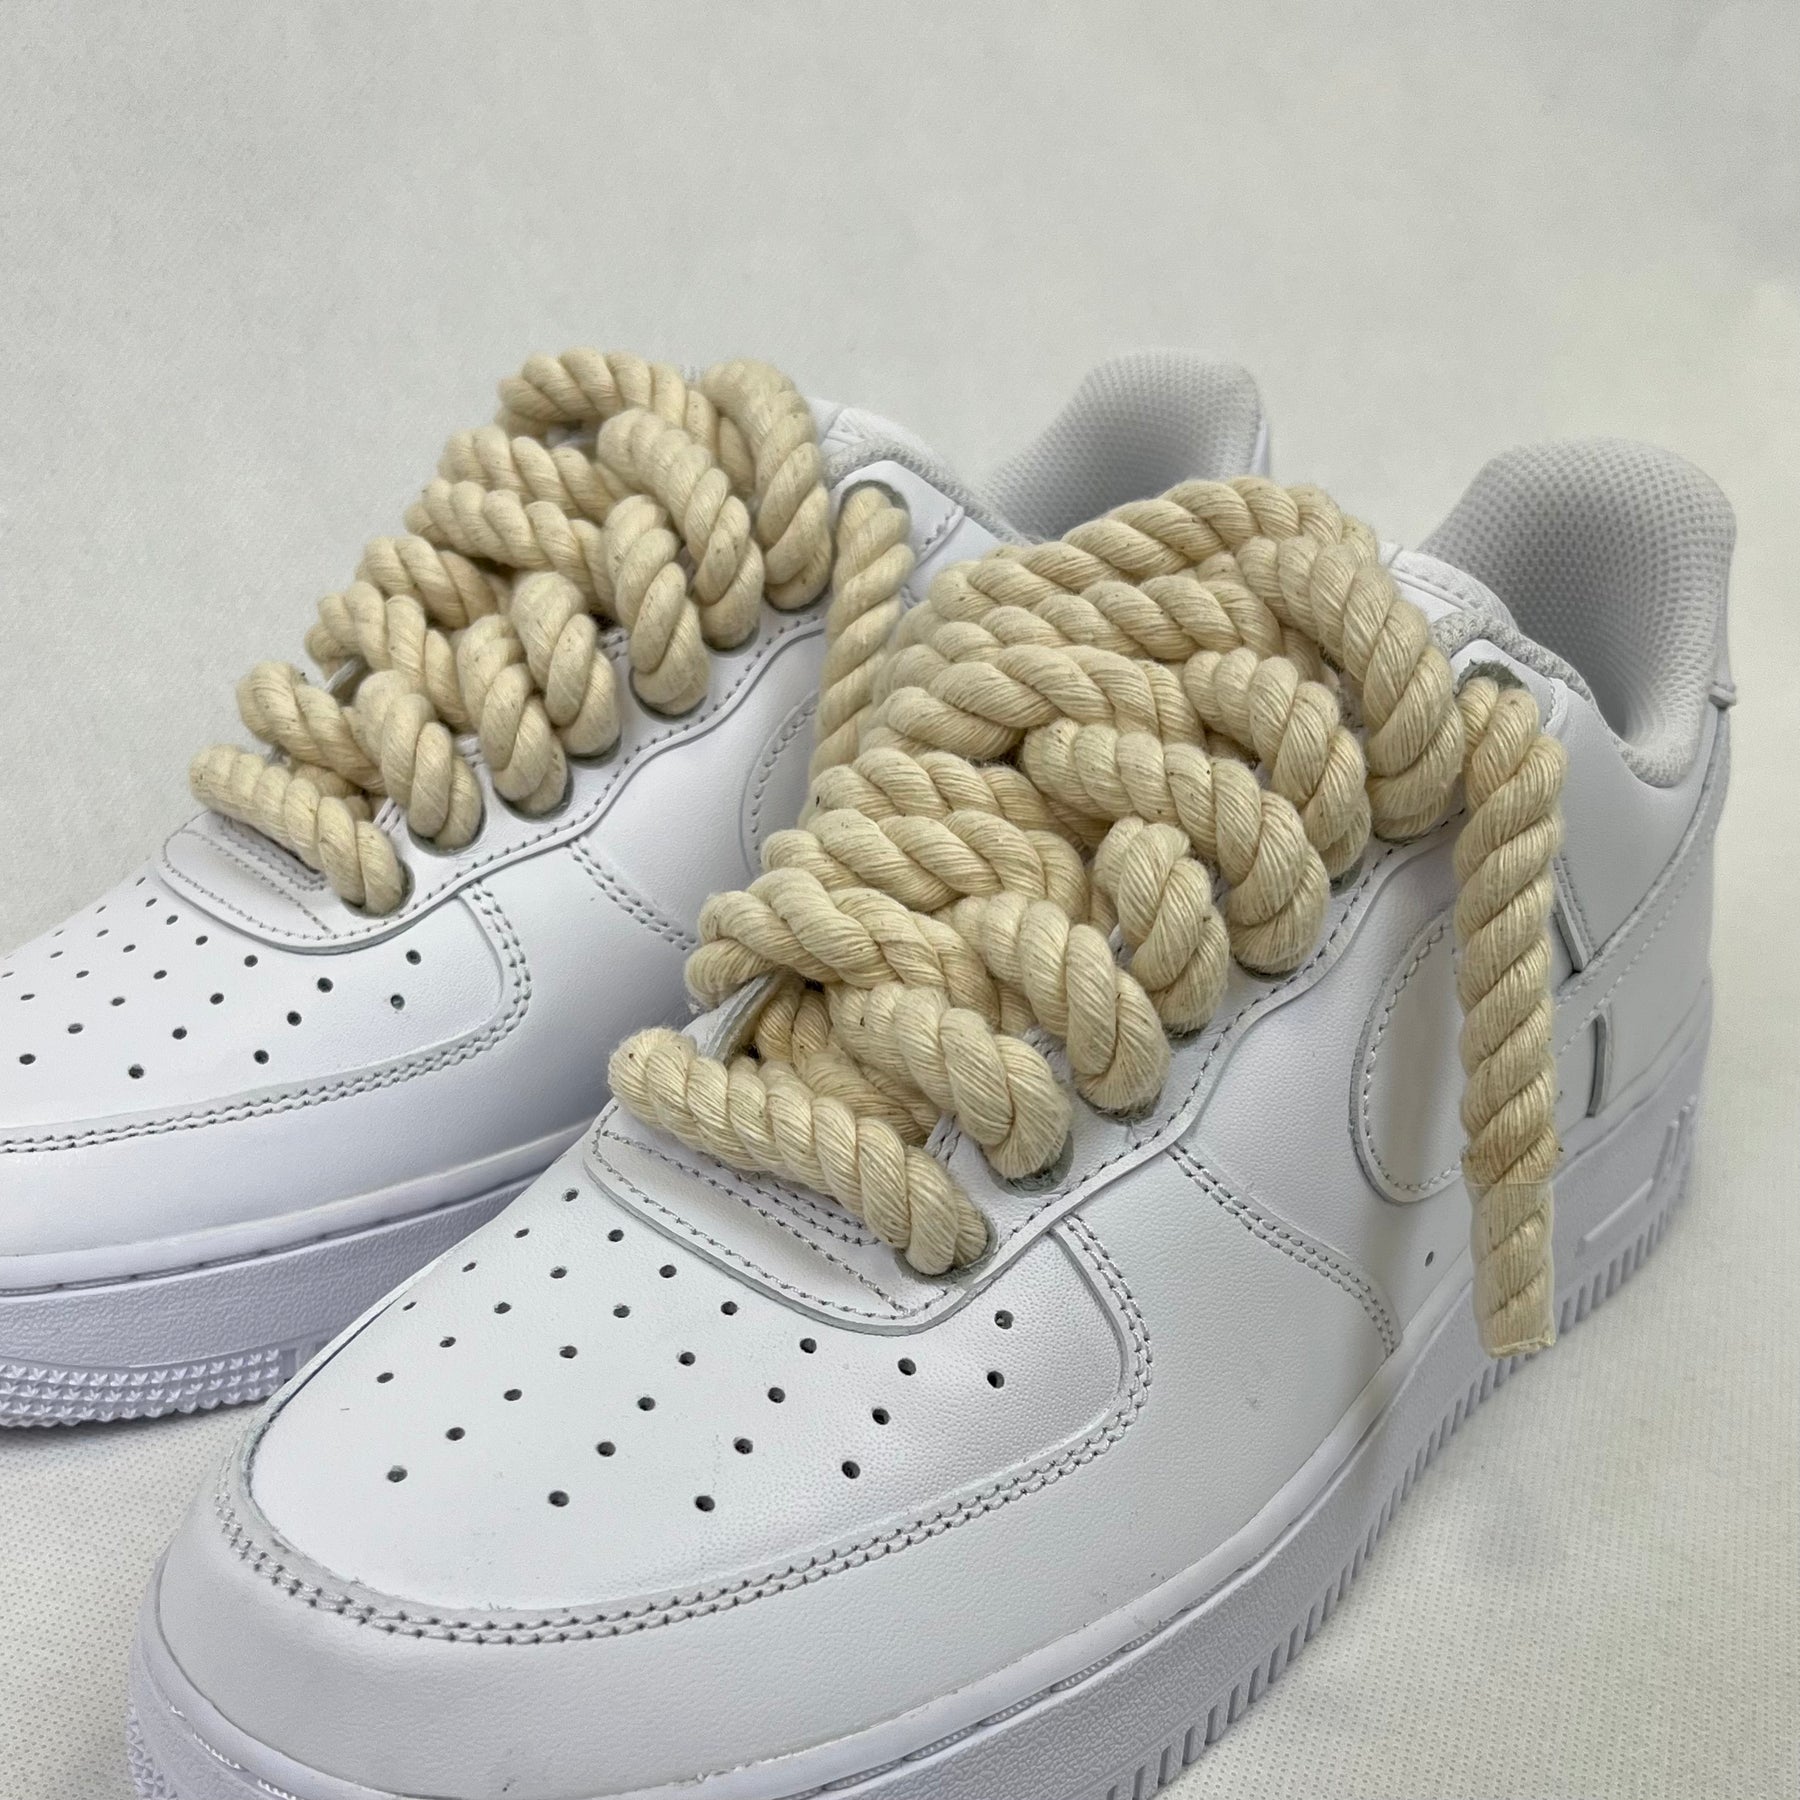 rope laces for air force 1 fits｜TikTok Search